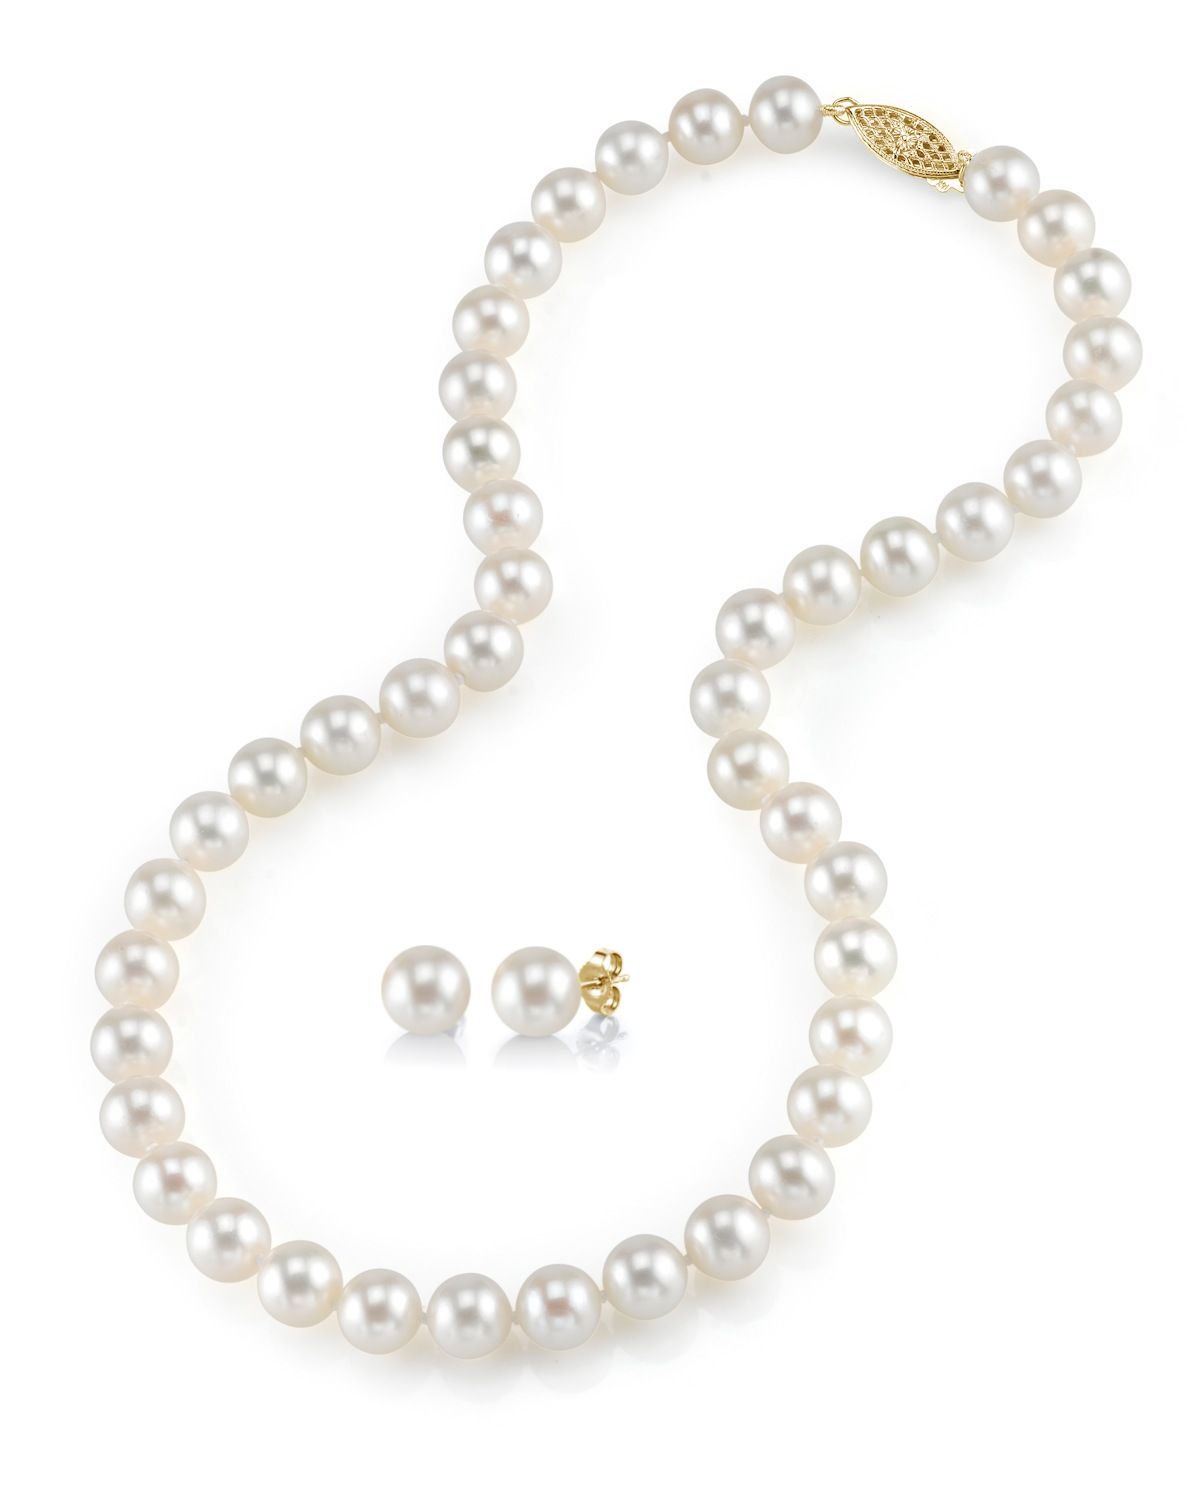 7-8mm Freshwater Choker Length Pearl Necklace & Earrings - Third Image